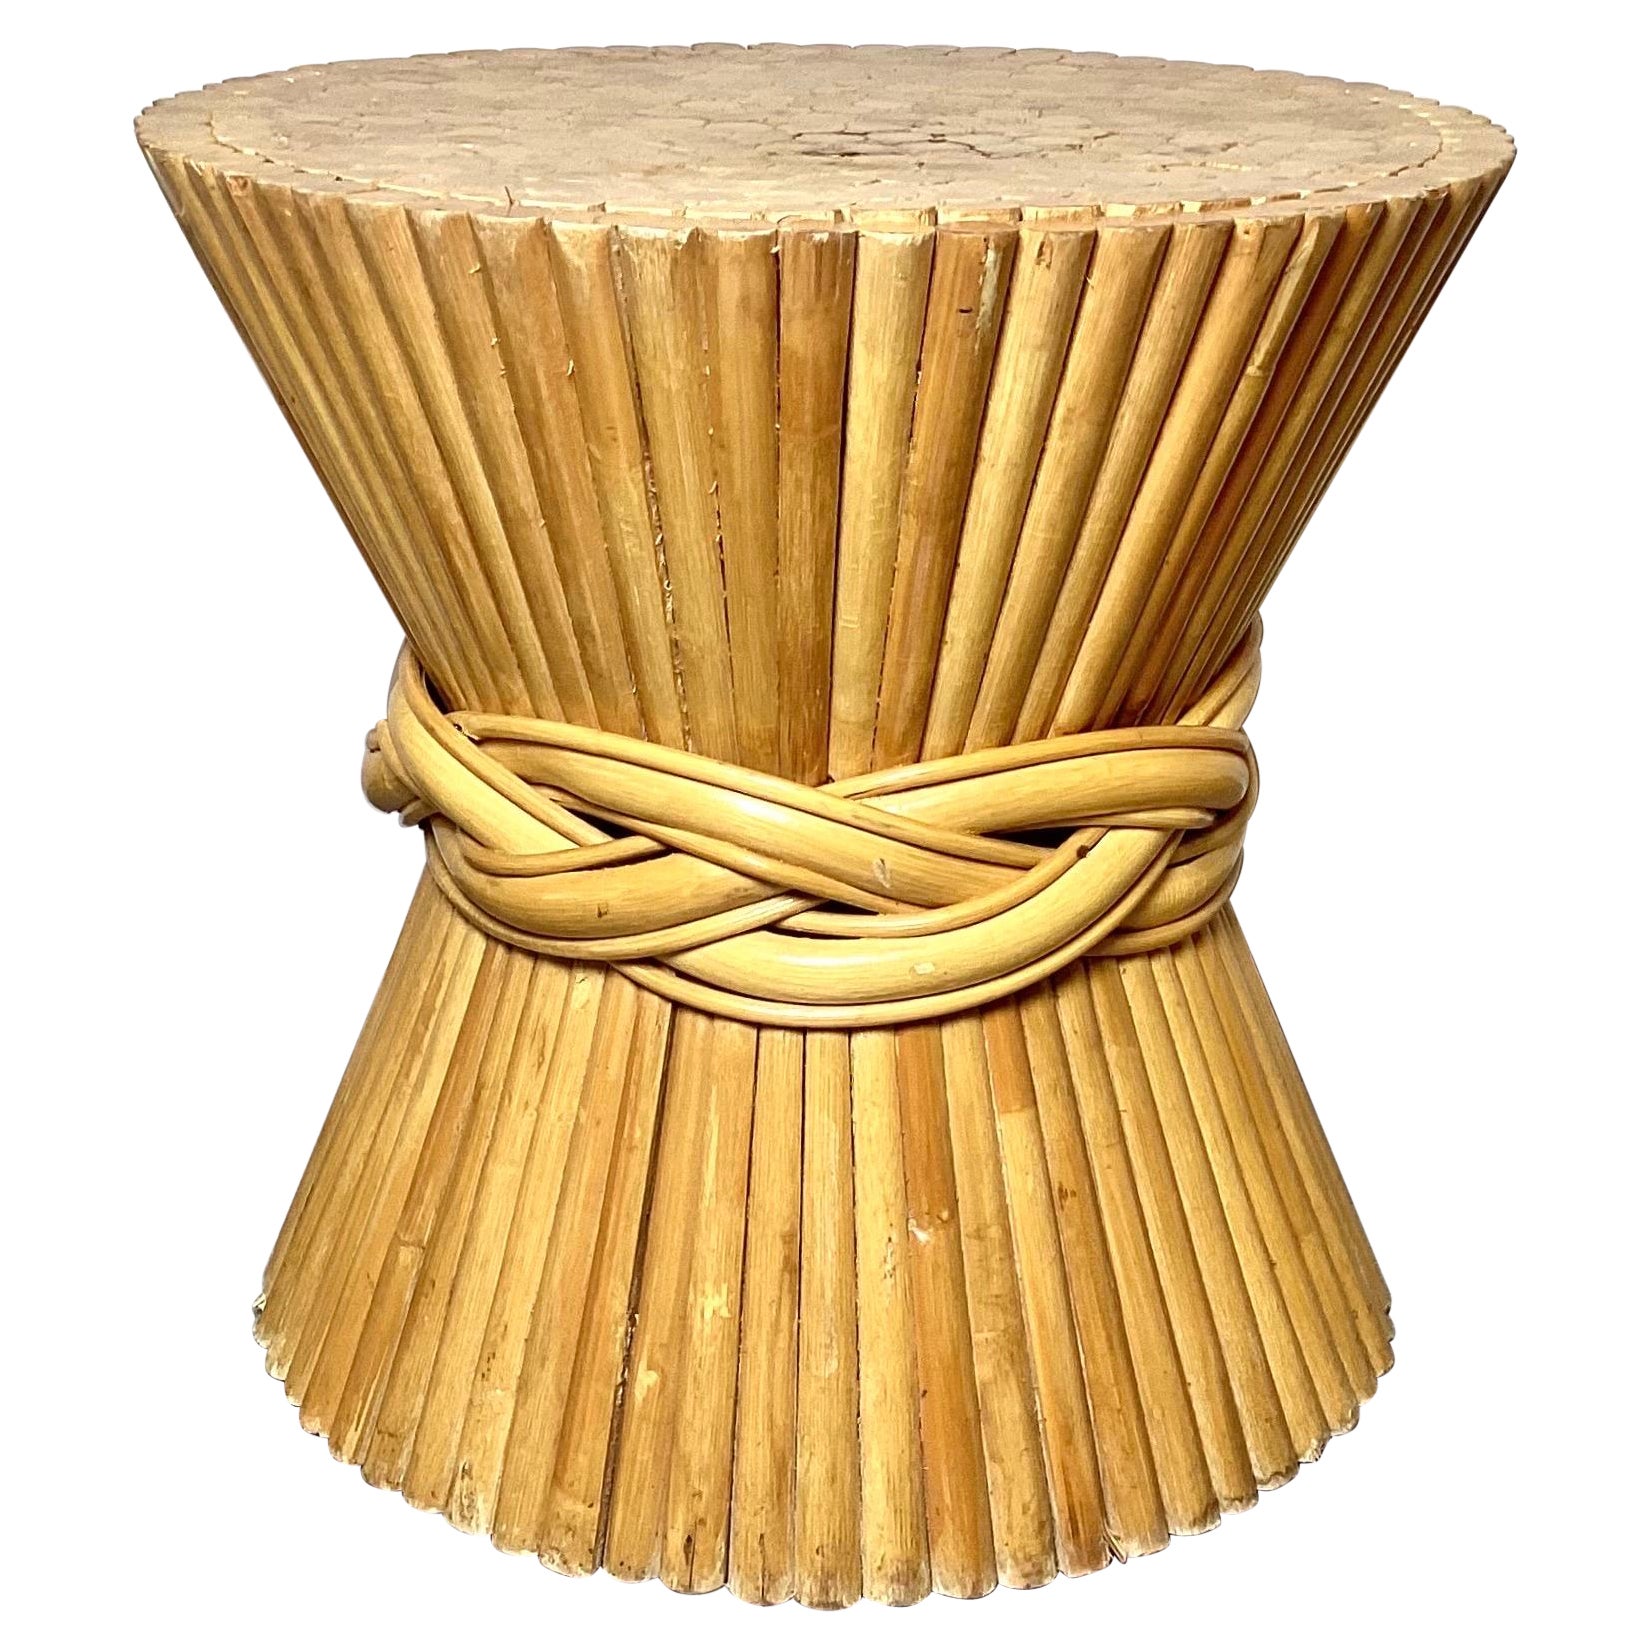 Bamboo Bundled Wheat Sheaf Side Table by McGuire 